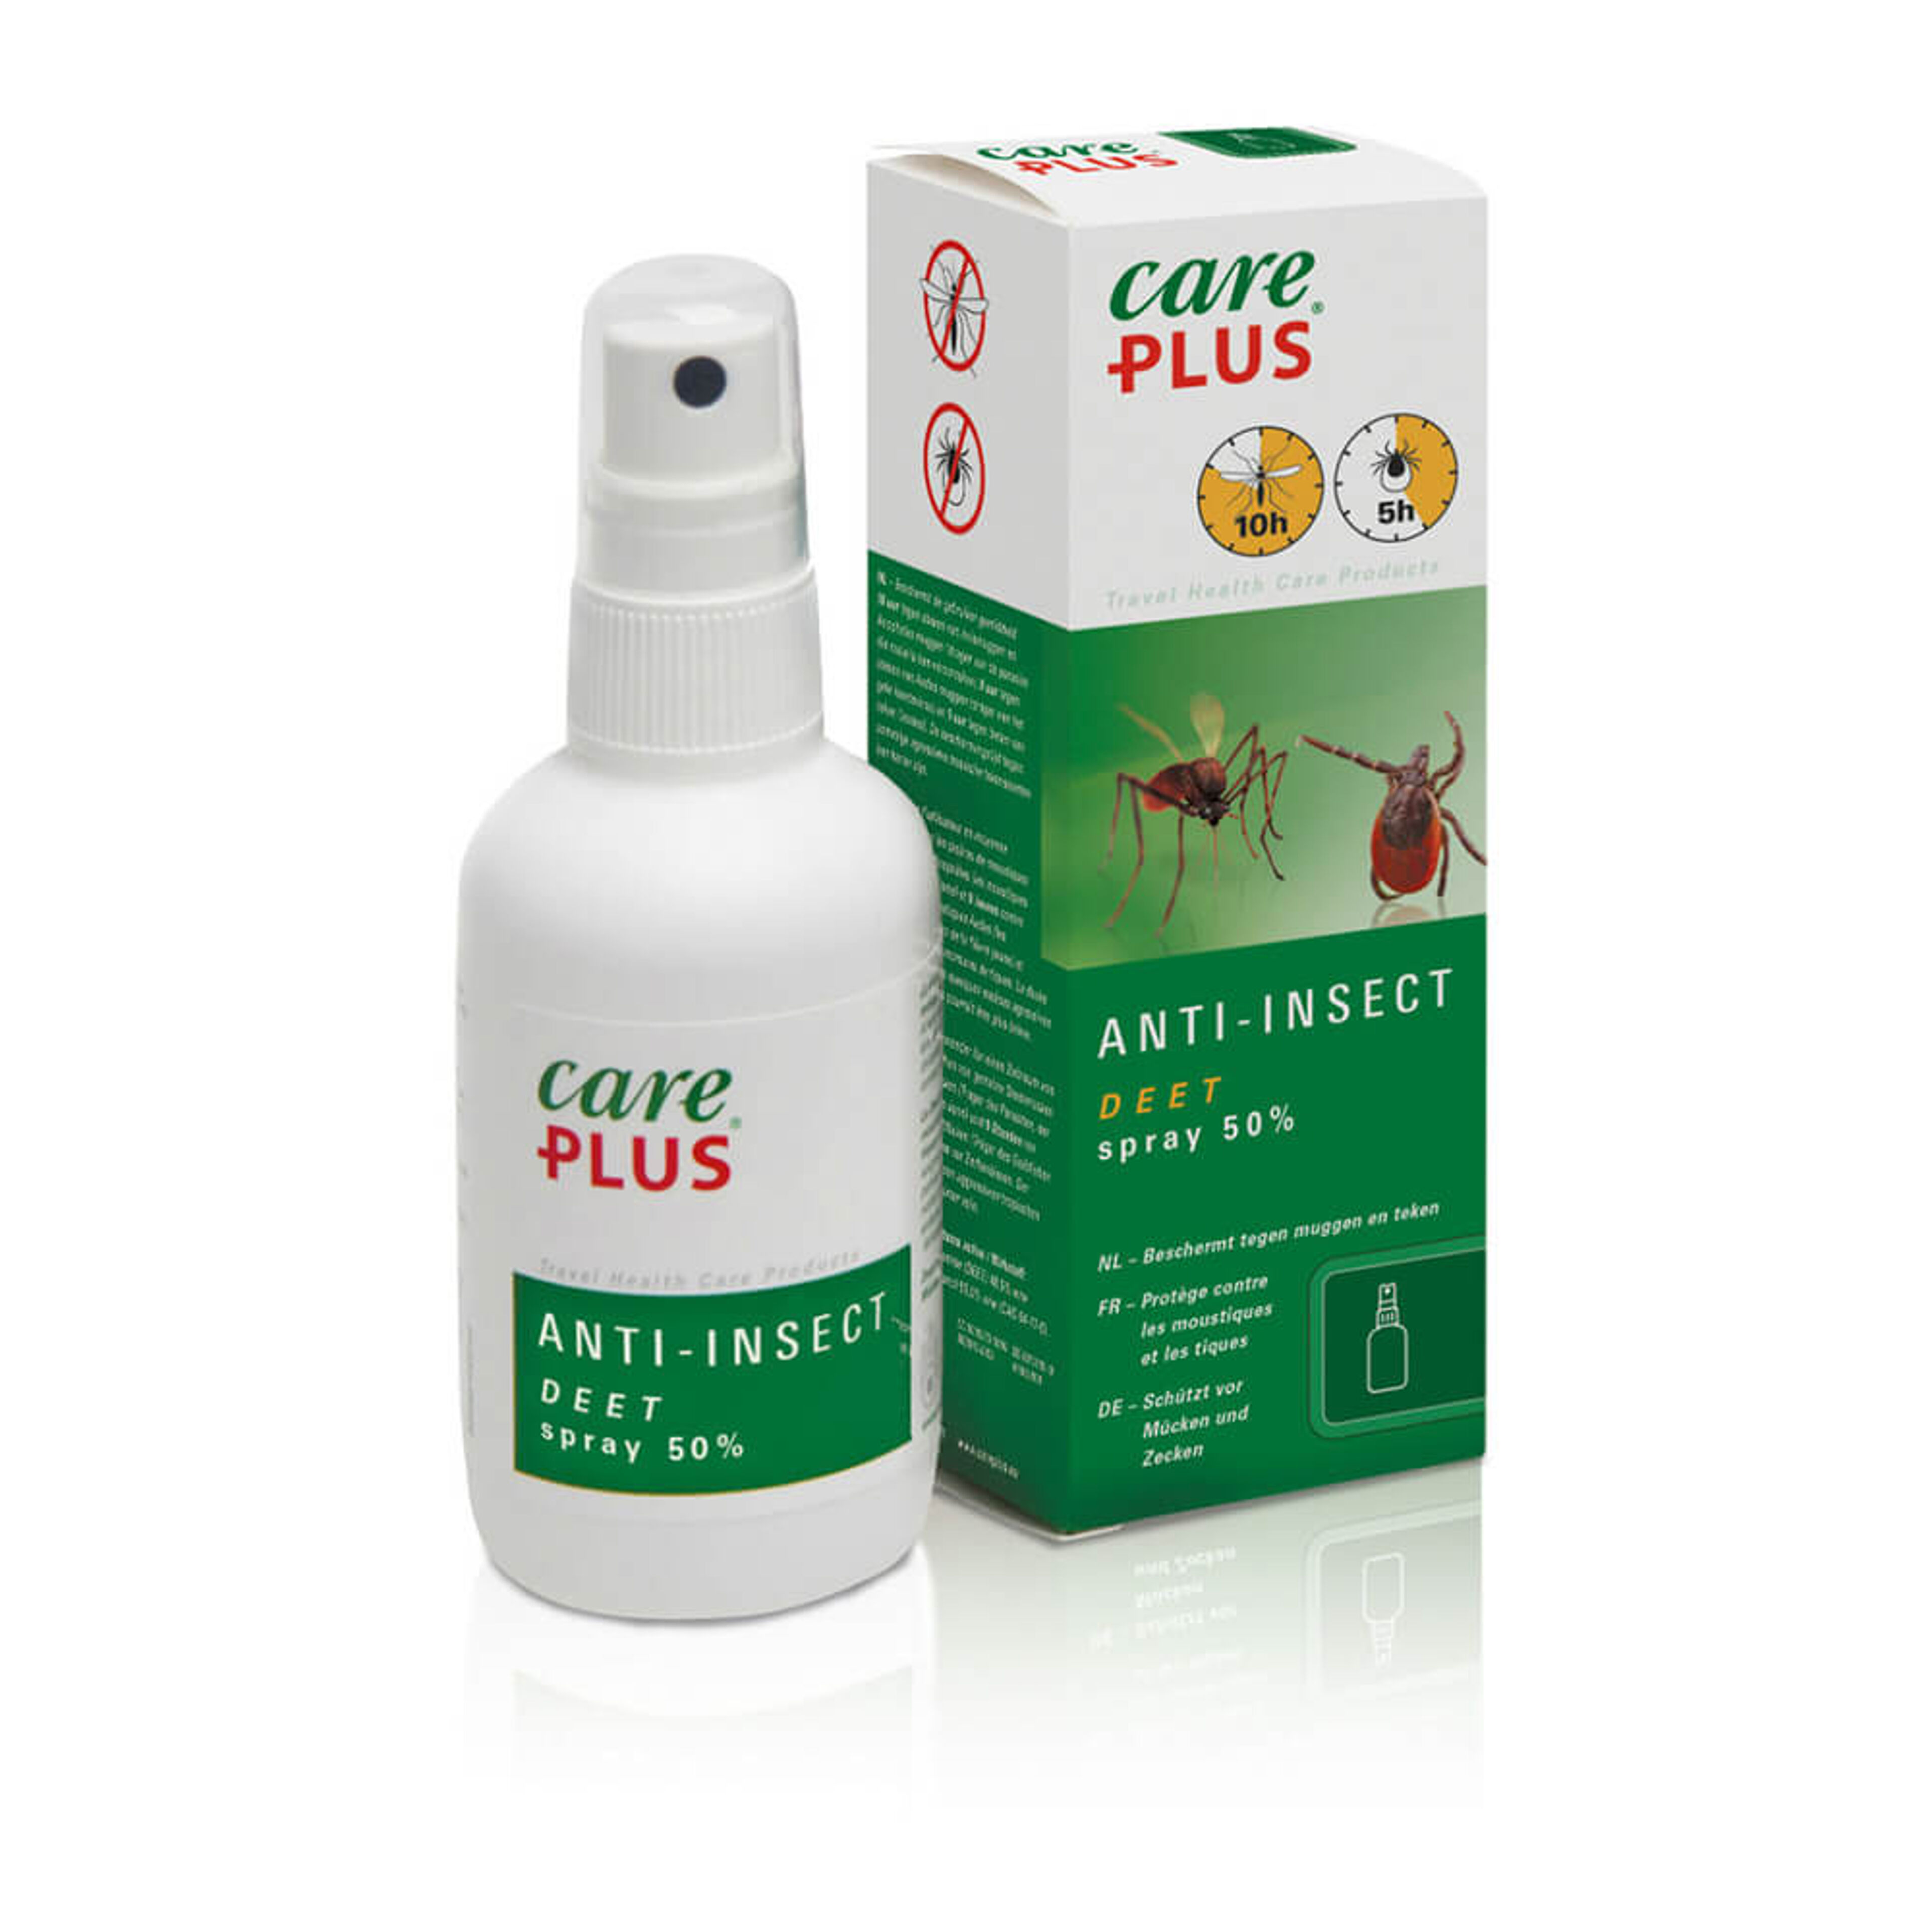 Care Plus Anti-Insect Deet 50% spray